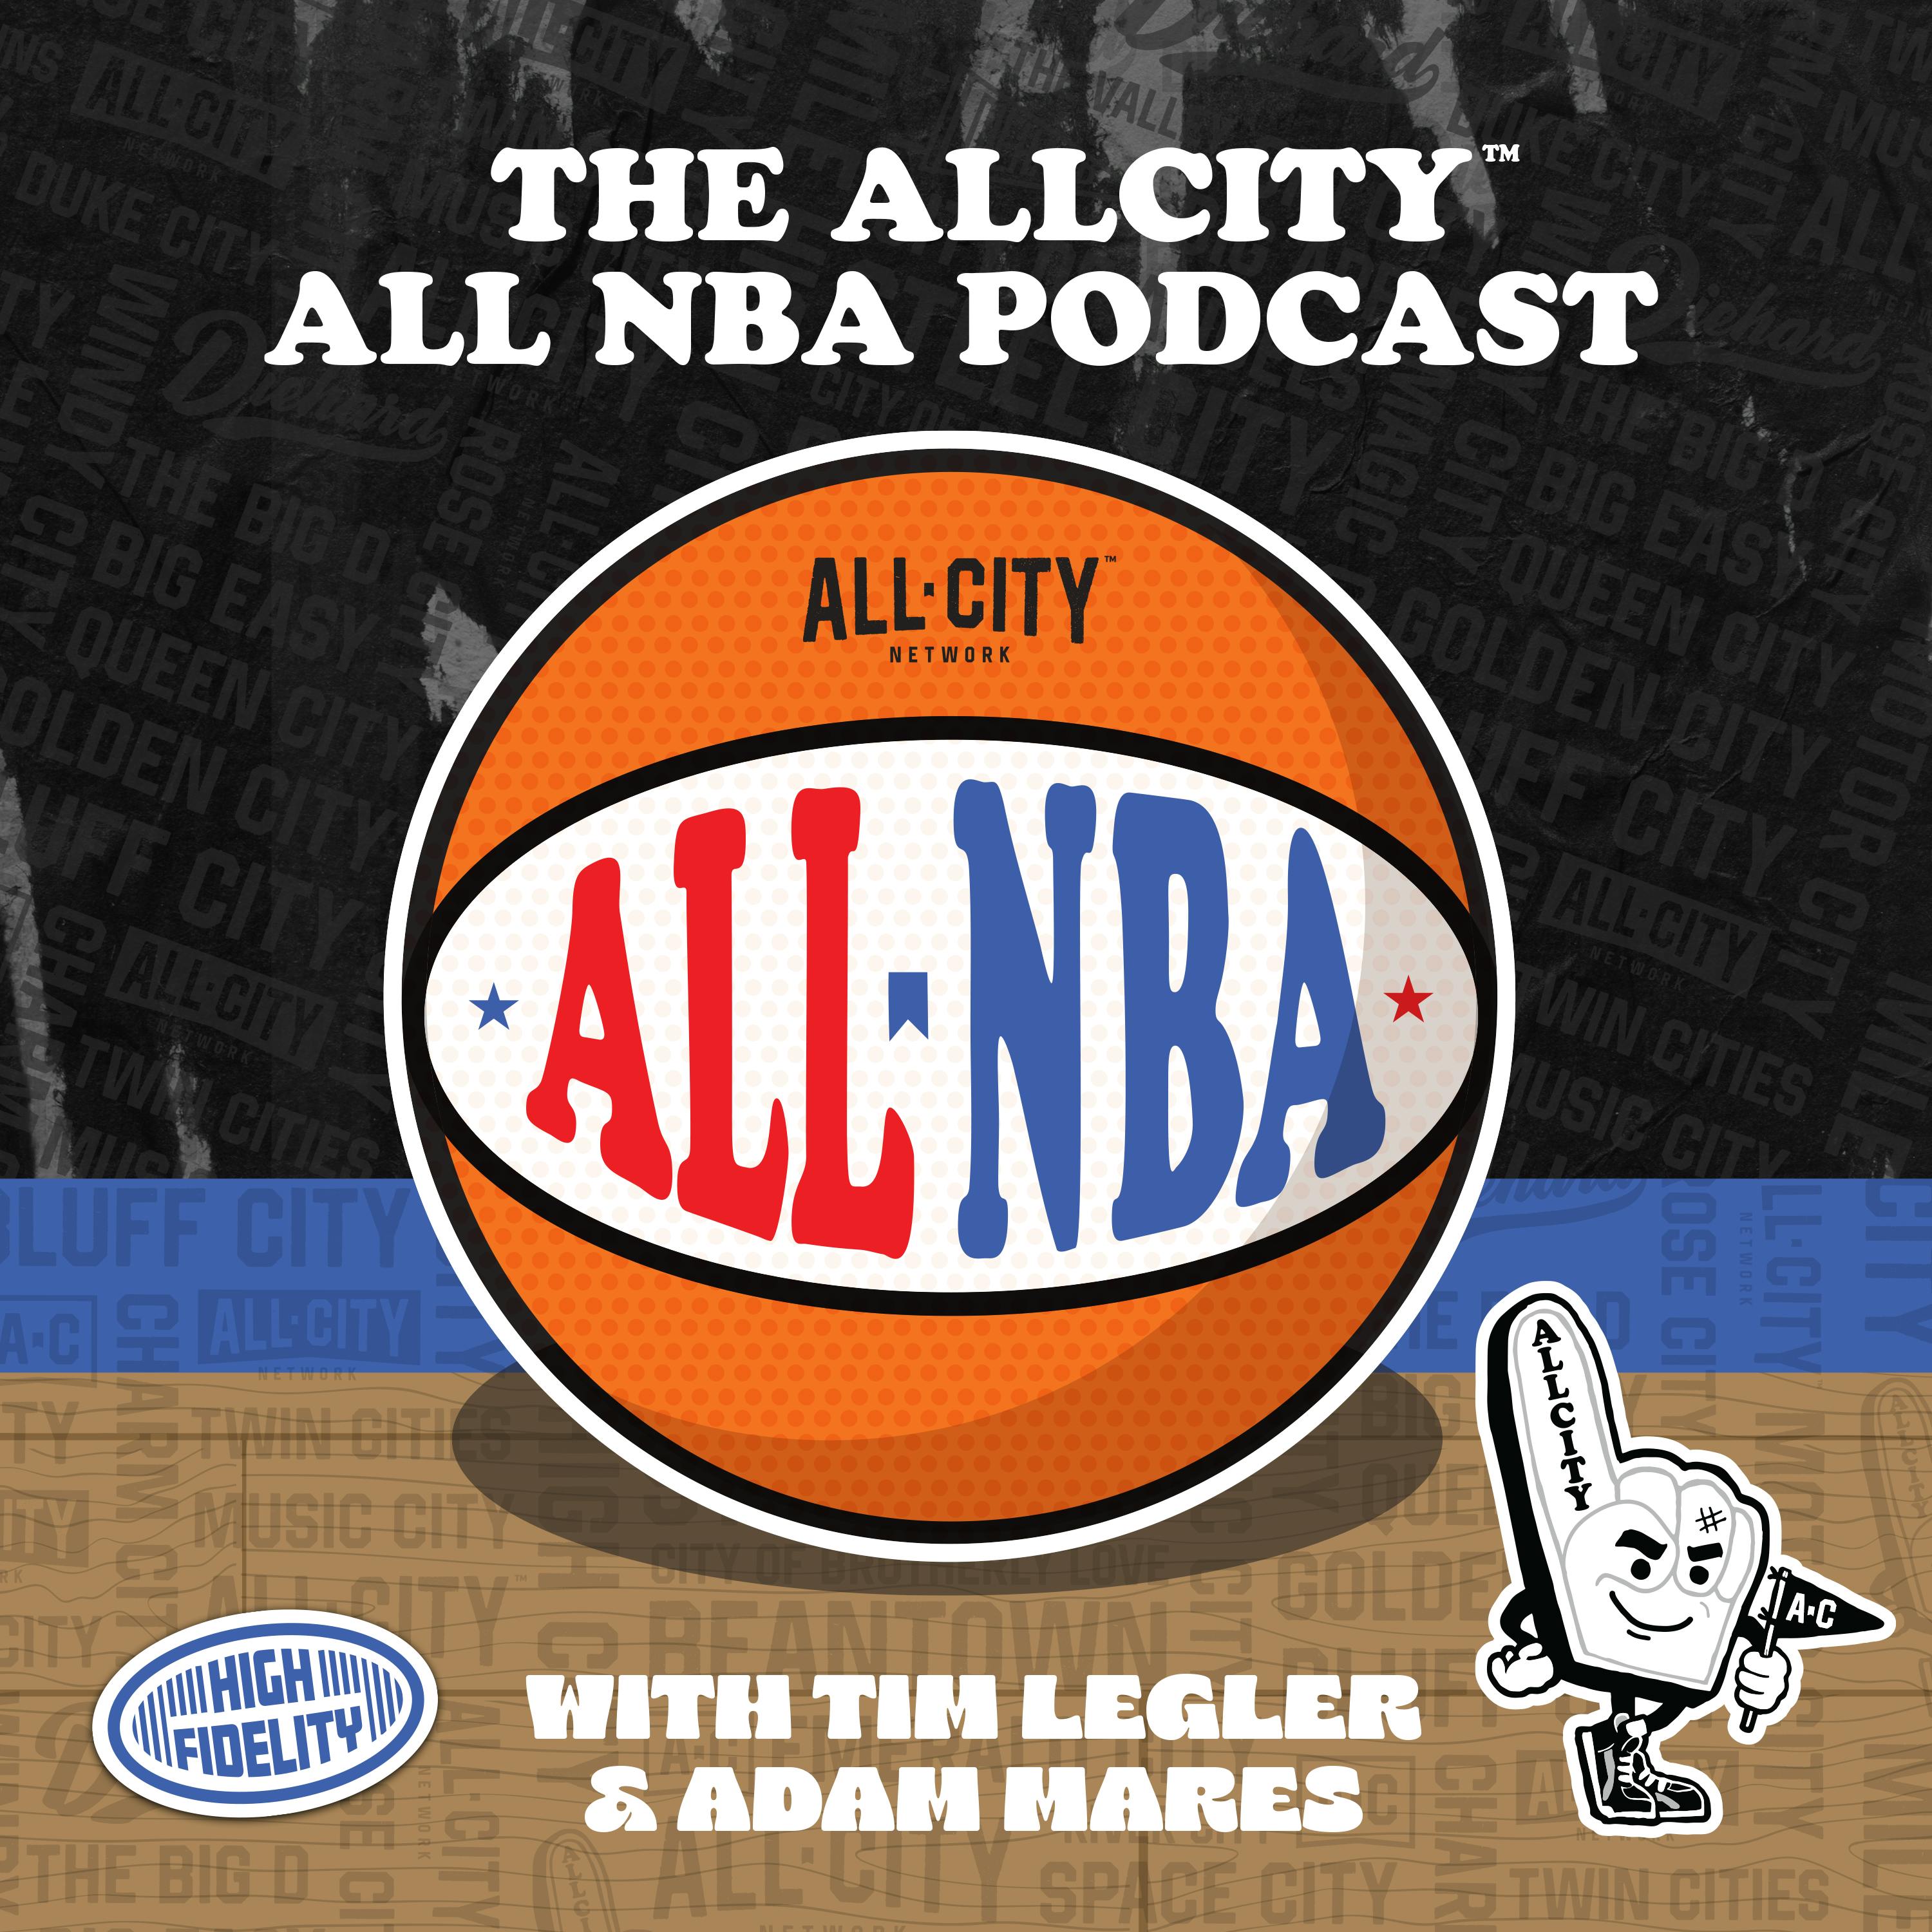 The ALL NBA Podcast: Is Kyrie Irving making you rethink the ceiling for Luka Doncic and the Mavericks?